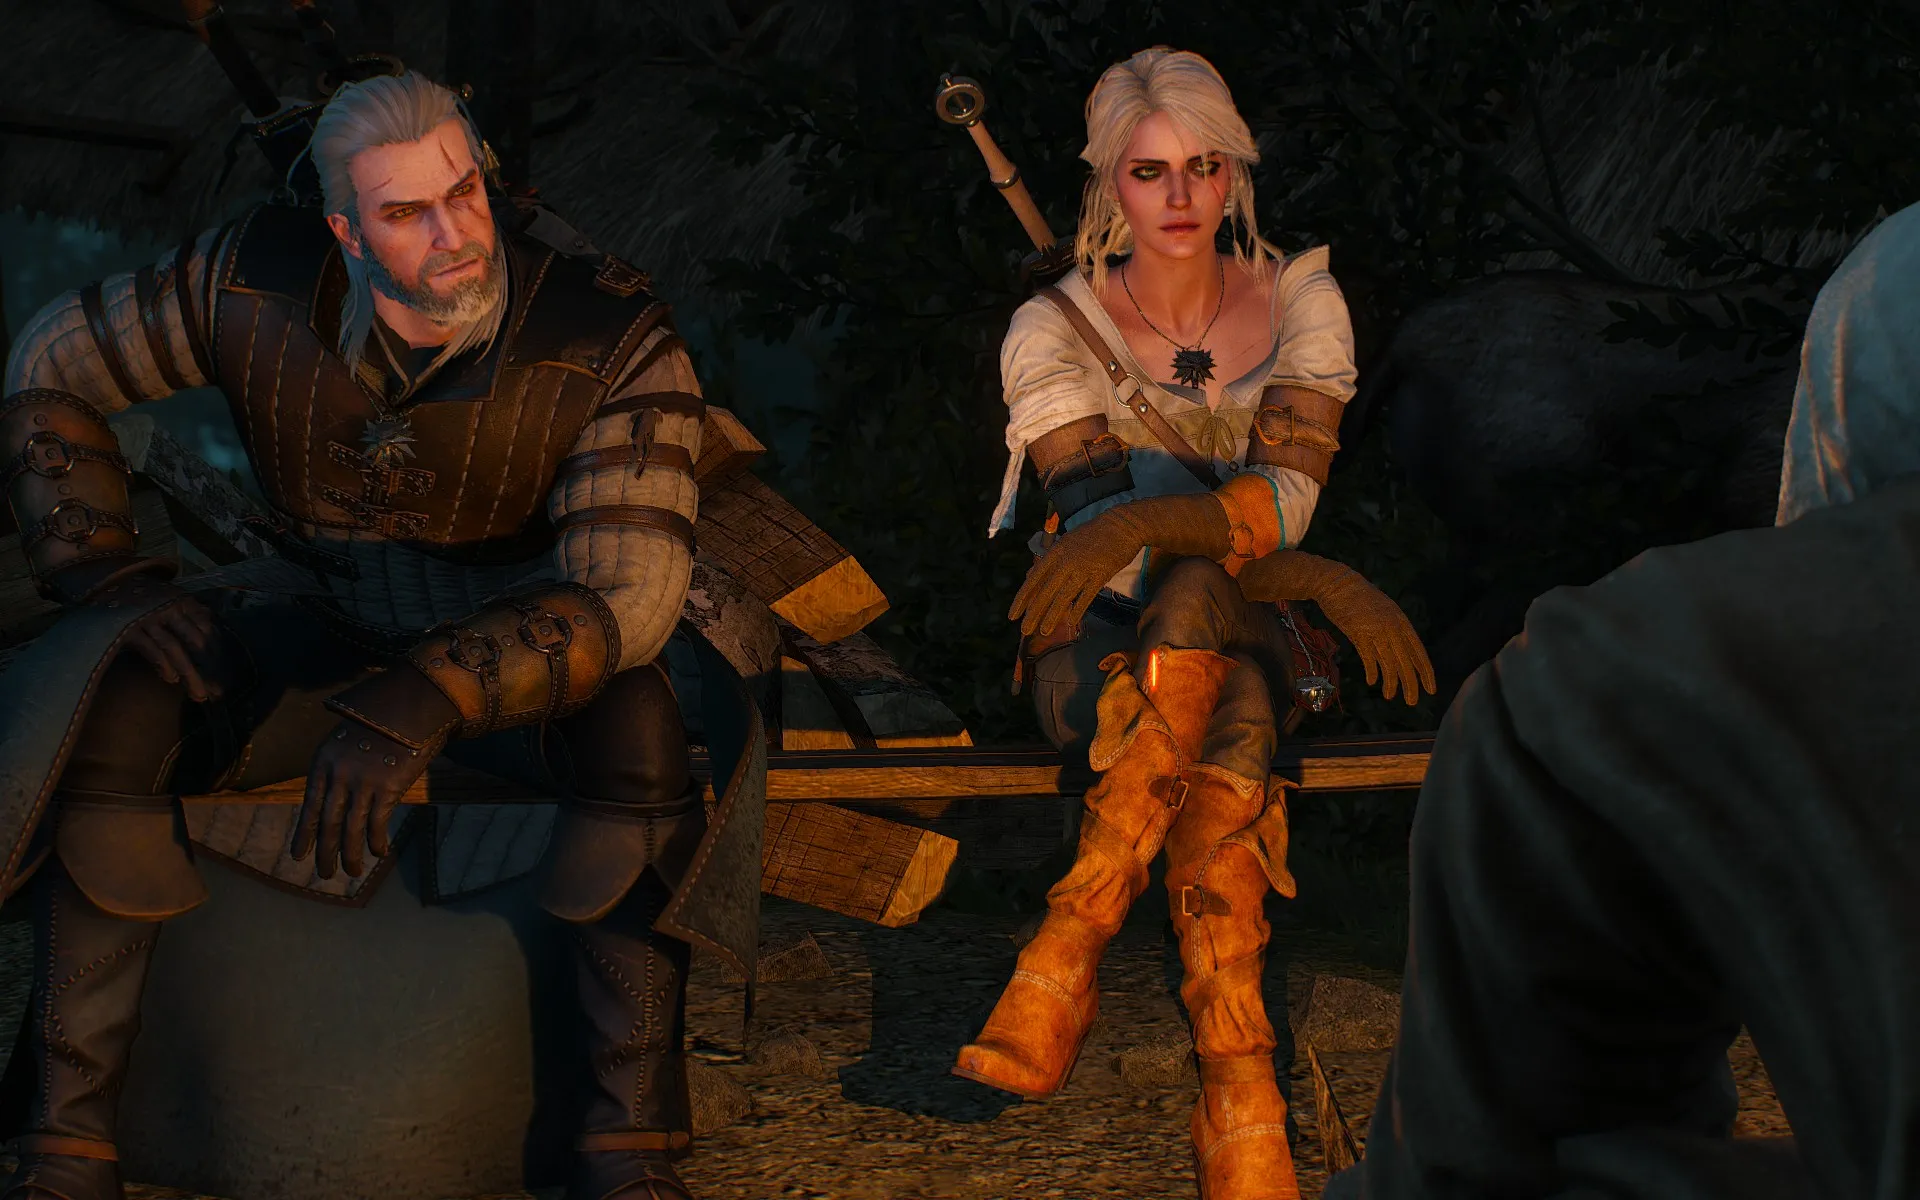 I think those upper arm things are supposed to be bracers, but otherwise Ciri has no protection in a fight.